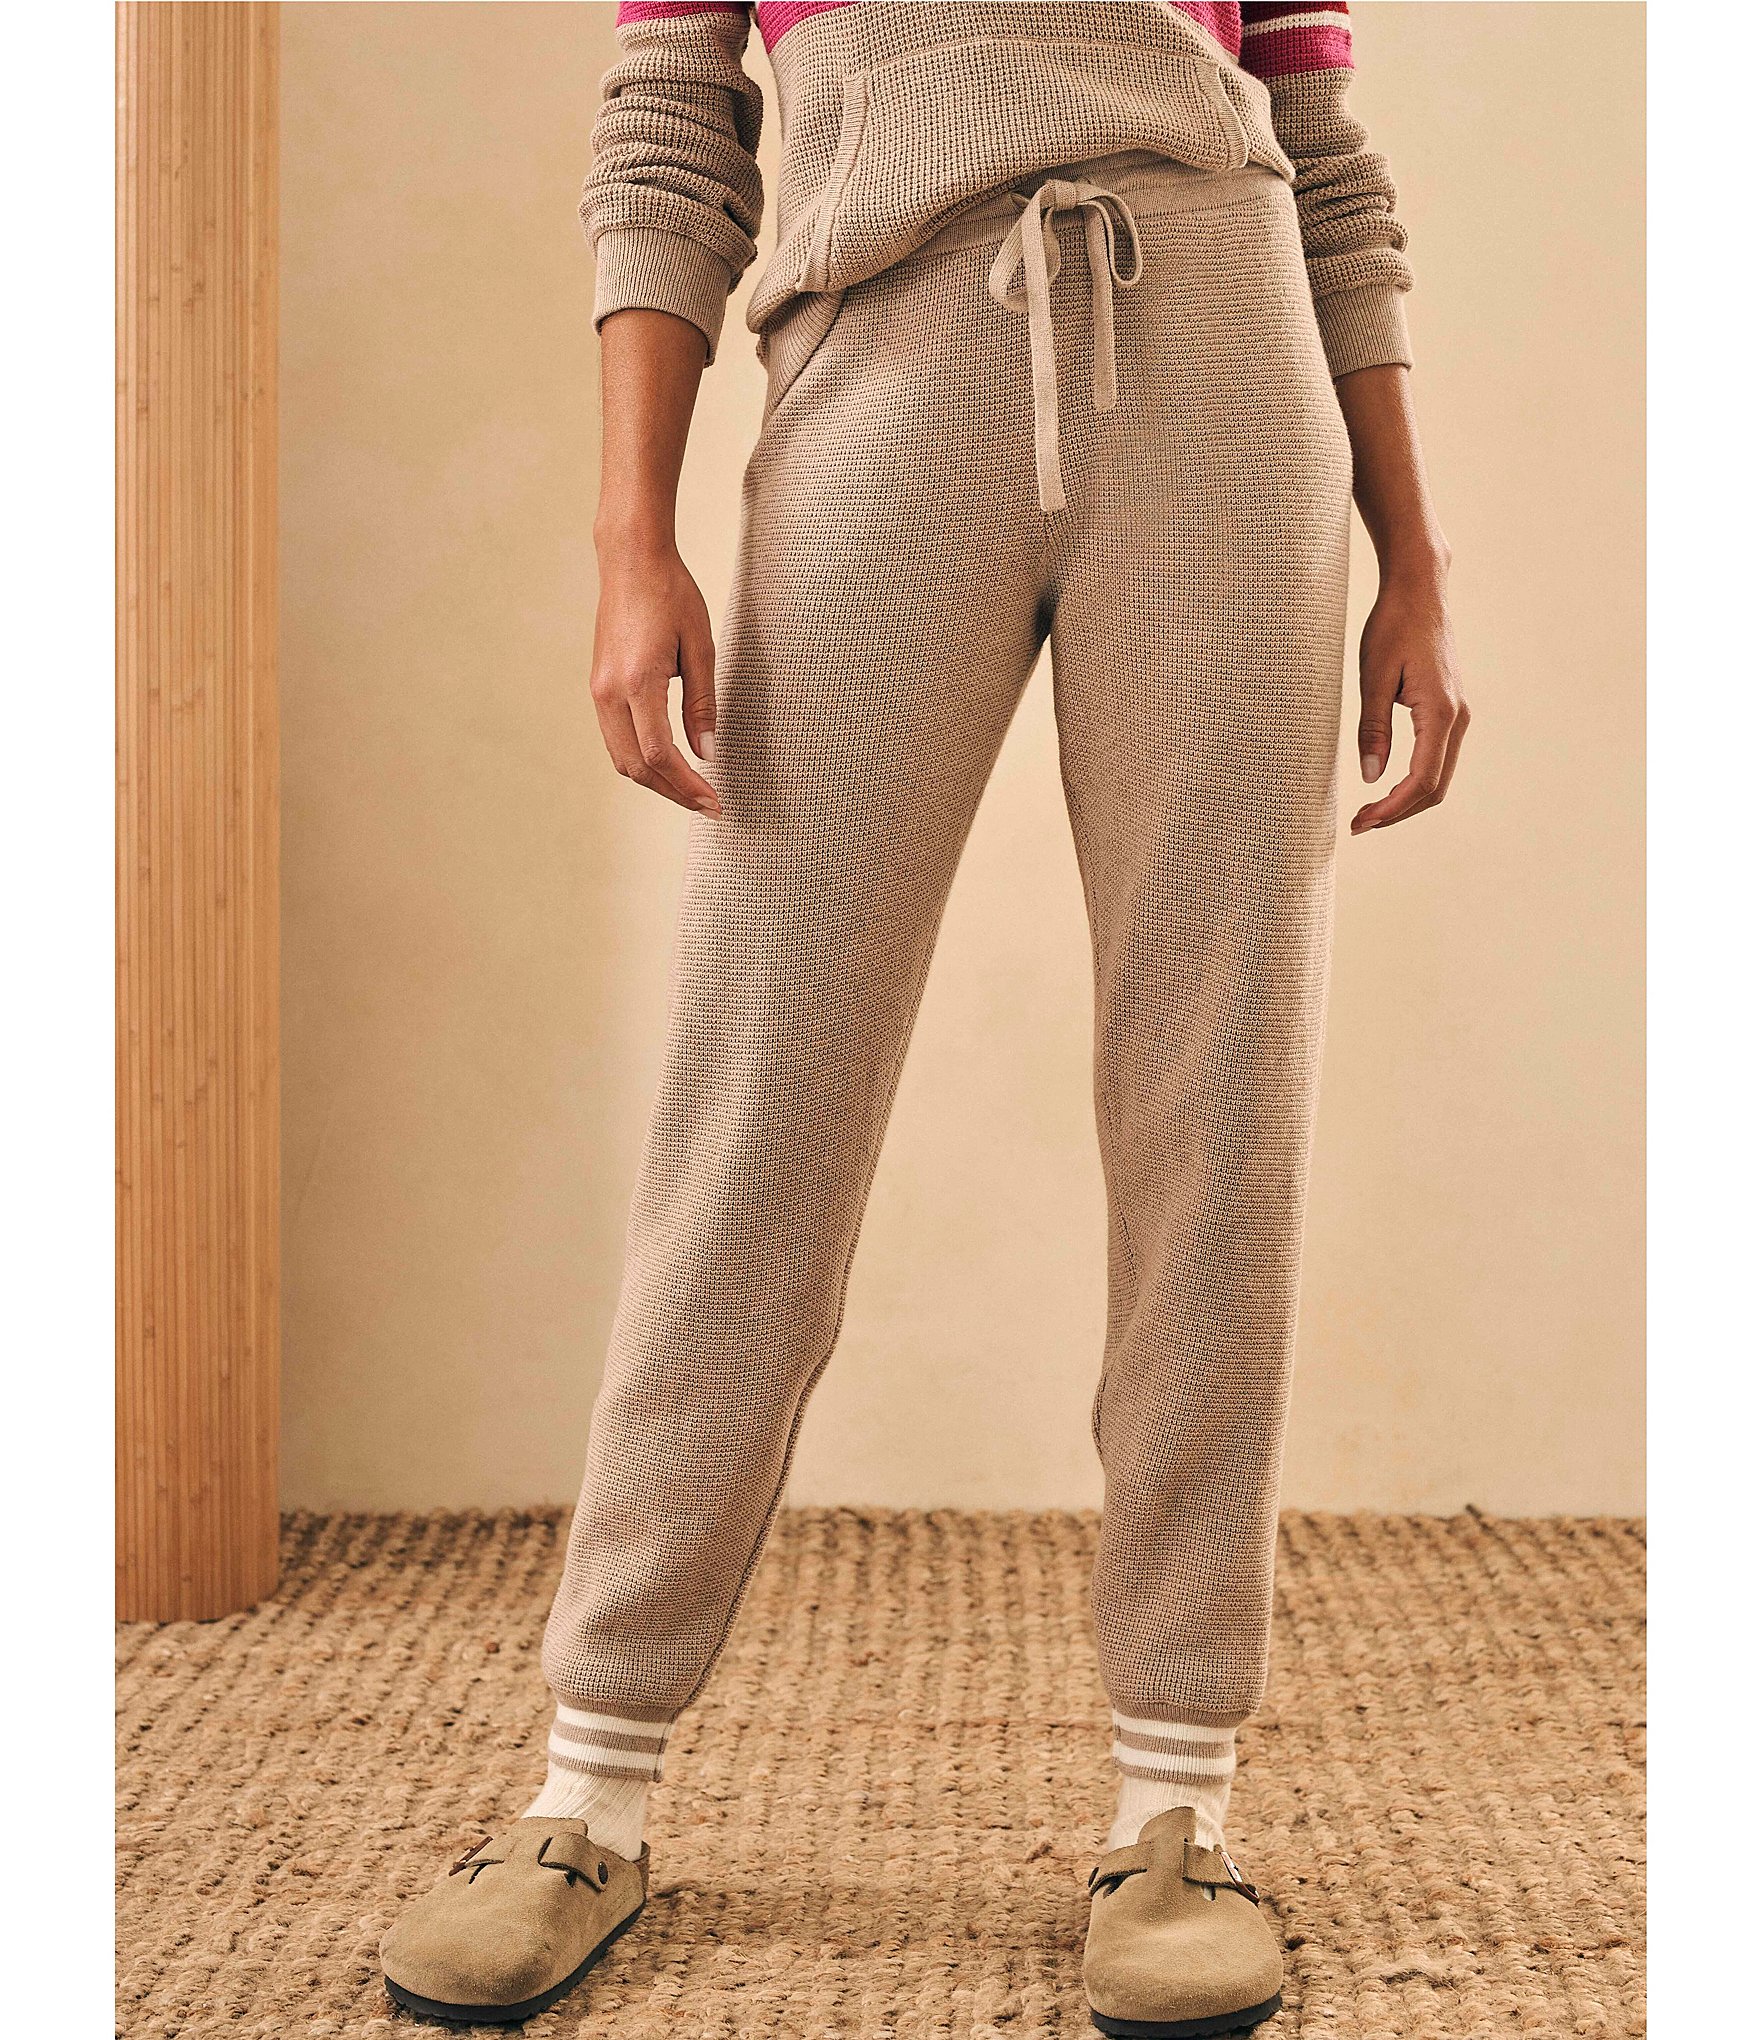 https://dimg.dillards.com/is/image/DillardsZoom/zoom/faherty-waffle-knit-cashmere-throwback-pocketed-striped-ankle-coordinating-jogger-pant/00000001_zi_59372bba-15b1-4e34-846e-af2f7b68f76a.jpg